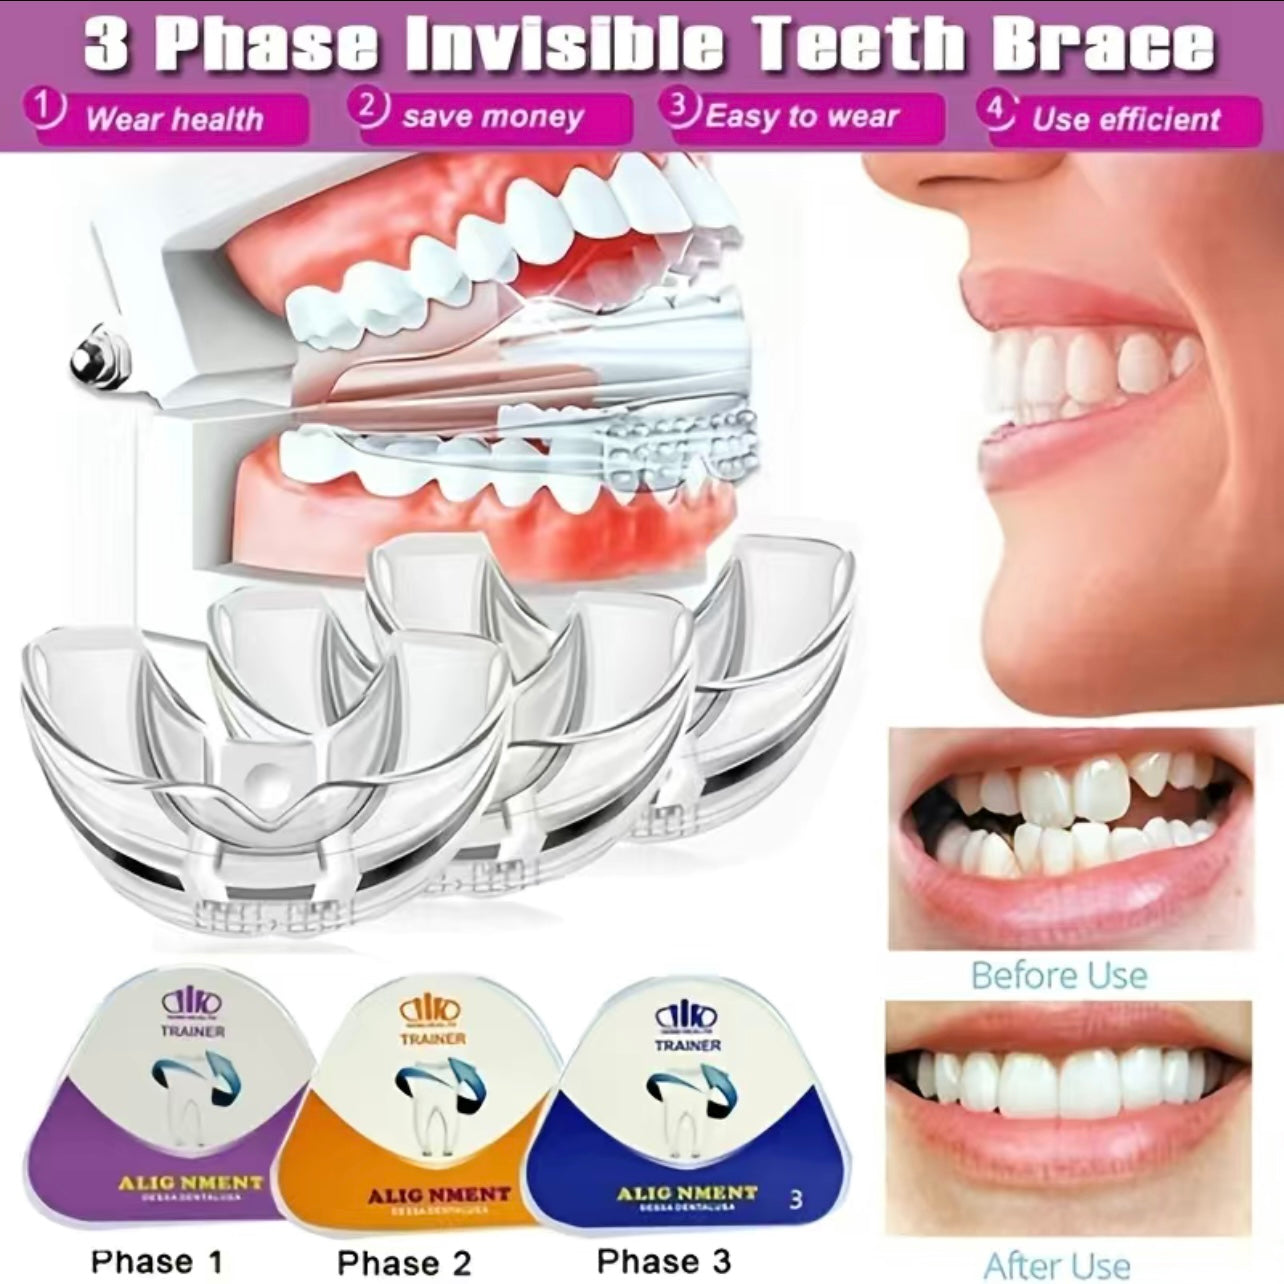 3 Stage Overnight Teeth Aligners - the 3 Phase Night Guard Braces! At home braces. Teeth aligners overnight. Mouth guard. Straighten teeth naturally. Straighten teeth without braces. Veneers. TikTok Viral products. TikTok made me buy it. TikTok famous items 